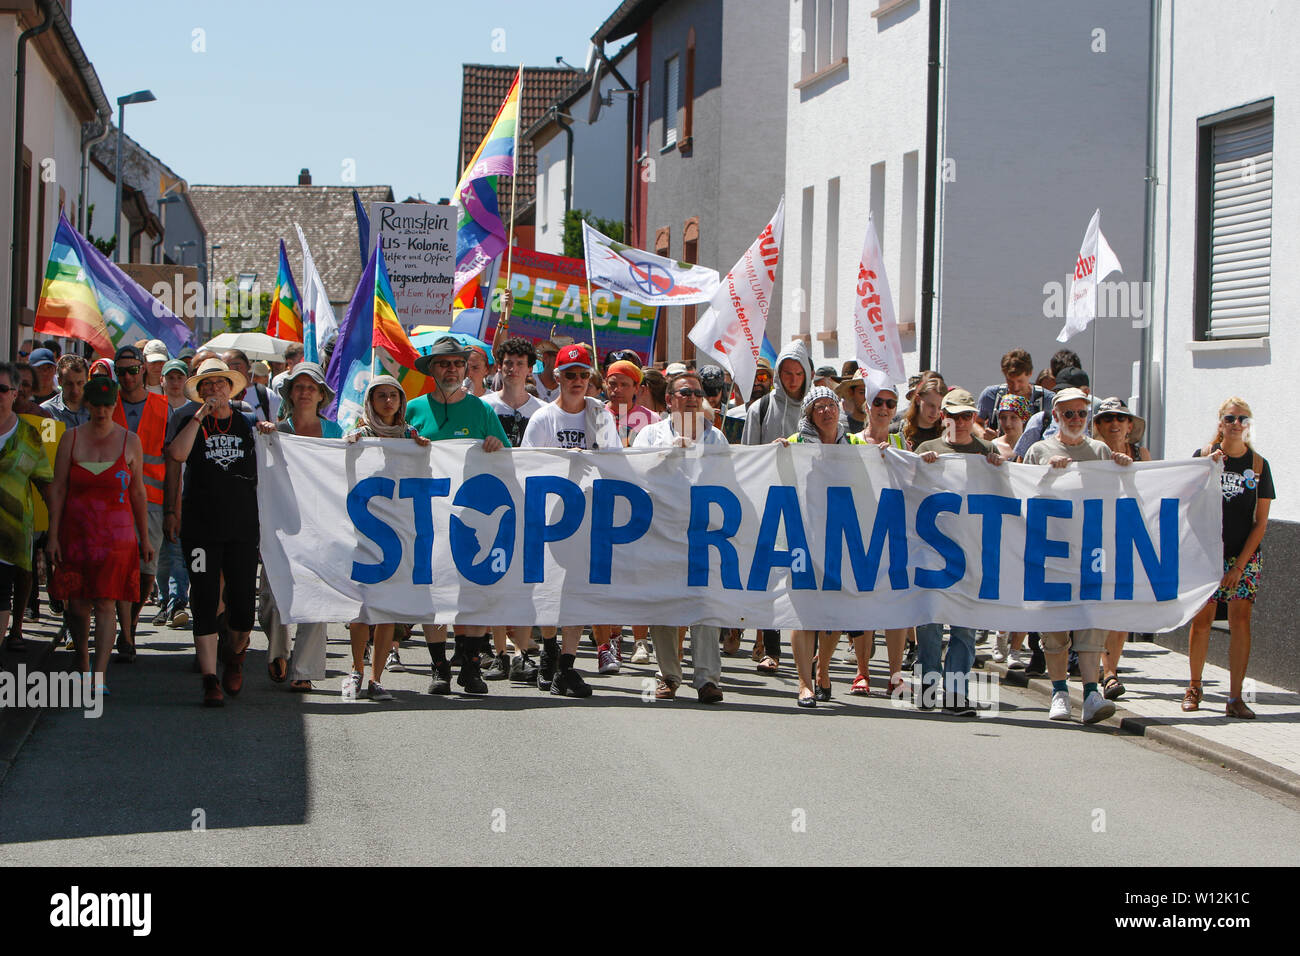 ramstein-germany-29th-june-2019-the-protesters-march-with-the-front-banner-reading-stopp-ramstein-through-ramsteina-few-thousand-peace-activists-from-the-stopp-air-base-ramstein-campaign-protested-outside-the-us-airbase-in-ramstein-the-protest-was-the-end-of-this-years-week-of-action-against-the-airbase-the-main-focus-of-this-years-events-was-on-the-alleged-involvement-of-the-airbase-in-the-drone-warfare-of-the-us-air-force-in-the-middle-east-and-africa-and-call-to-not-use-ramstein-for-a-future-war-with-iran-W12K1C.jpg